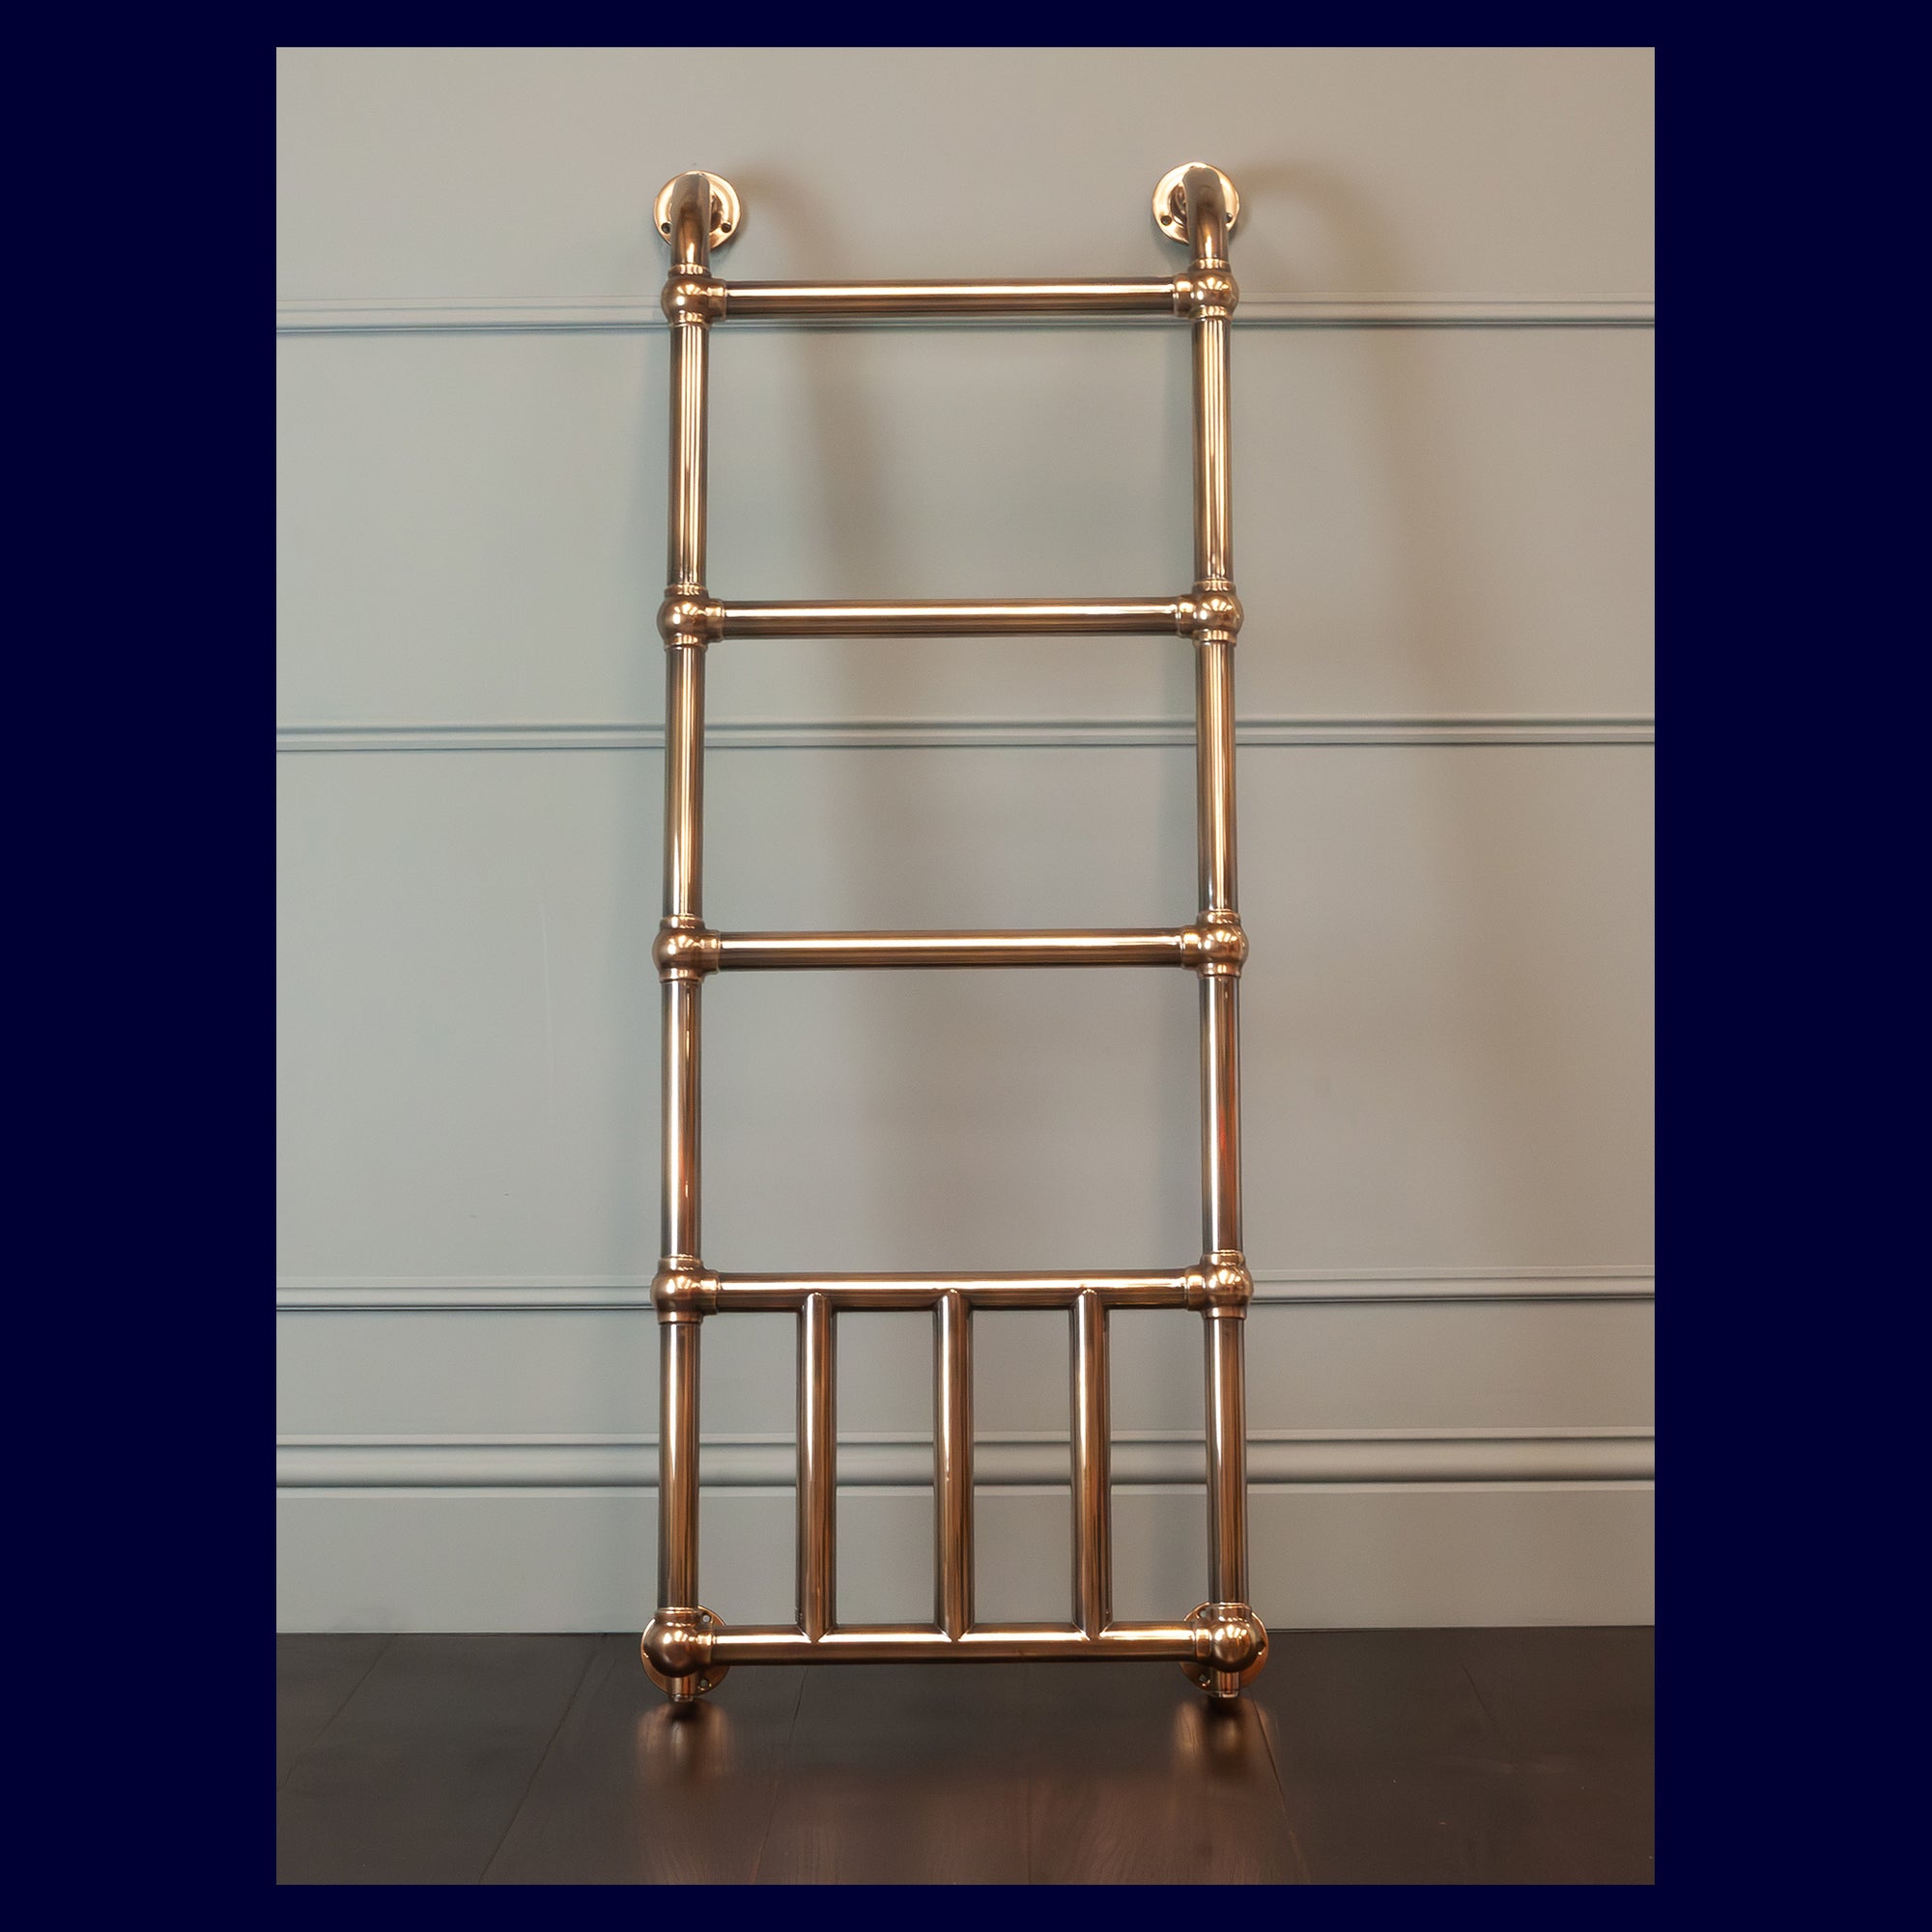 Ex-Display Oxford Heated Towel Rail - 1290 x 500 - Central Heating Only - Aged Brass - Rutland London